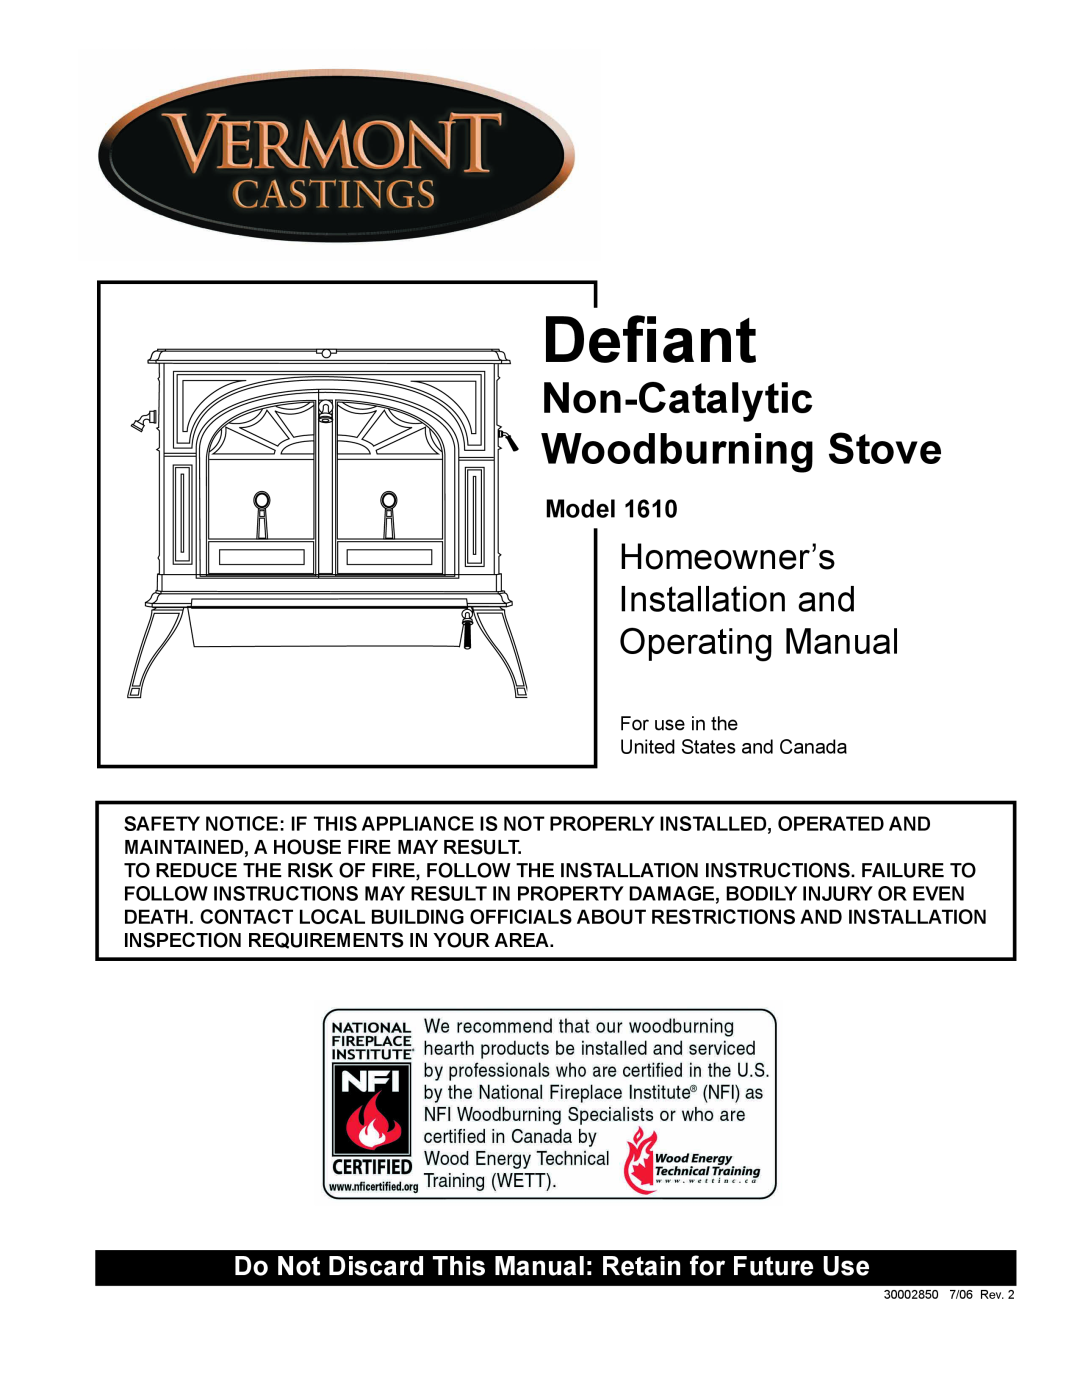 Vermont Casting 1610 installation instructions Deﬁant, Non-Catalytic Woodburning Stove, Model 